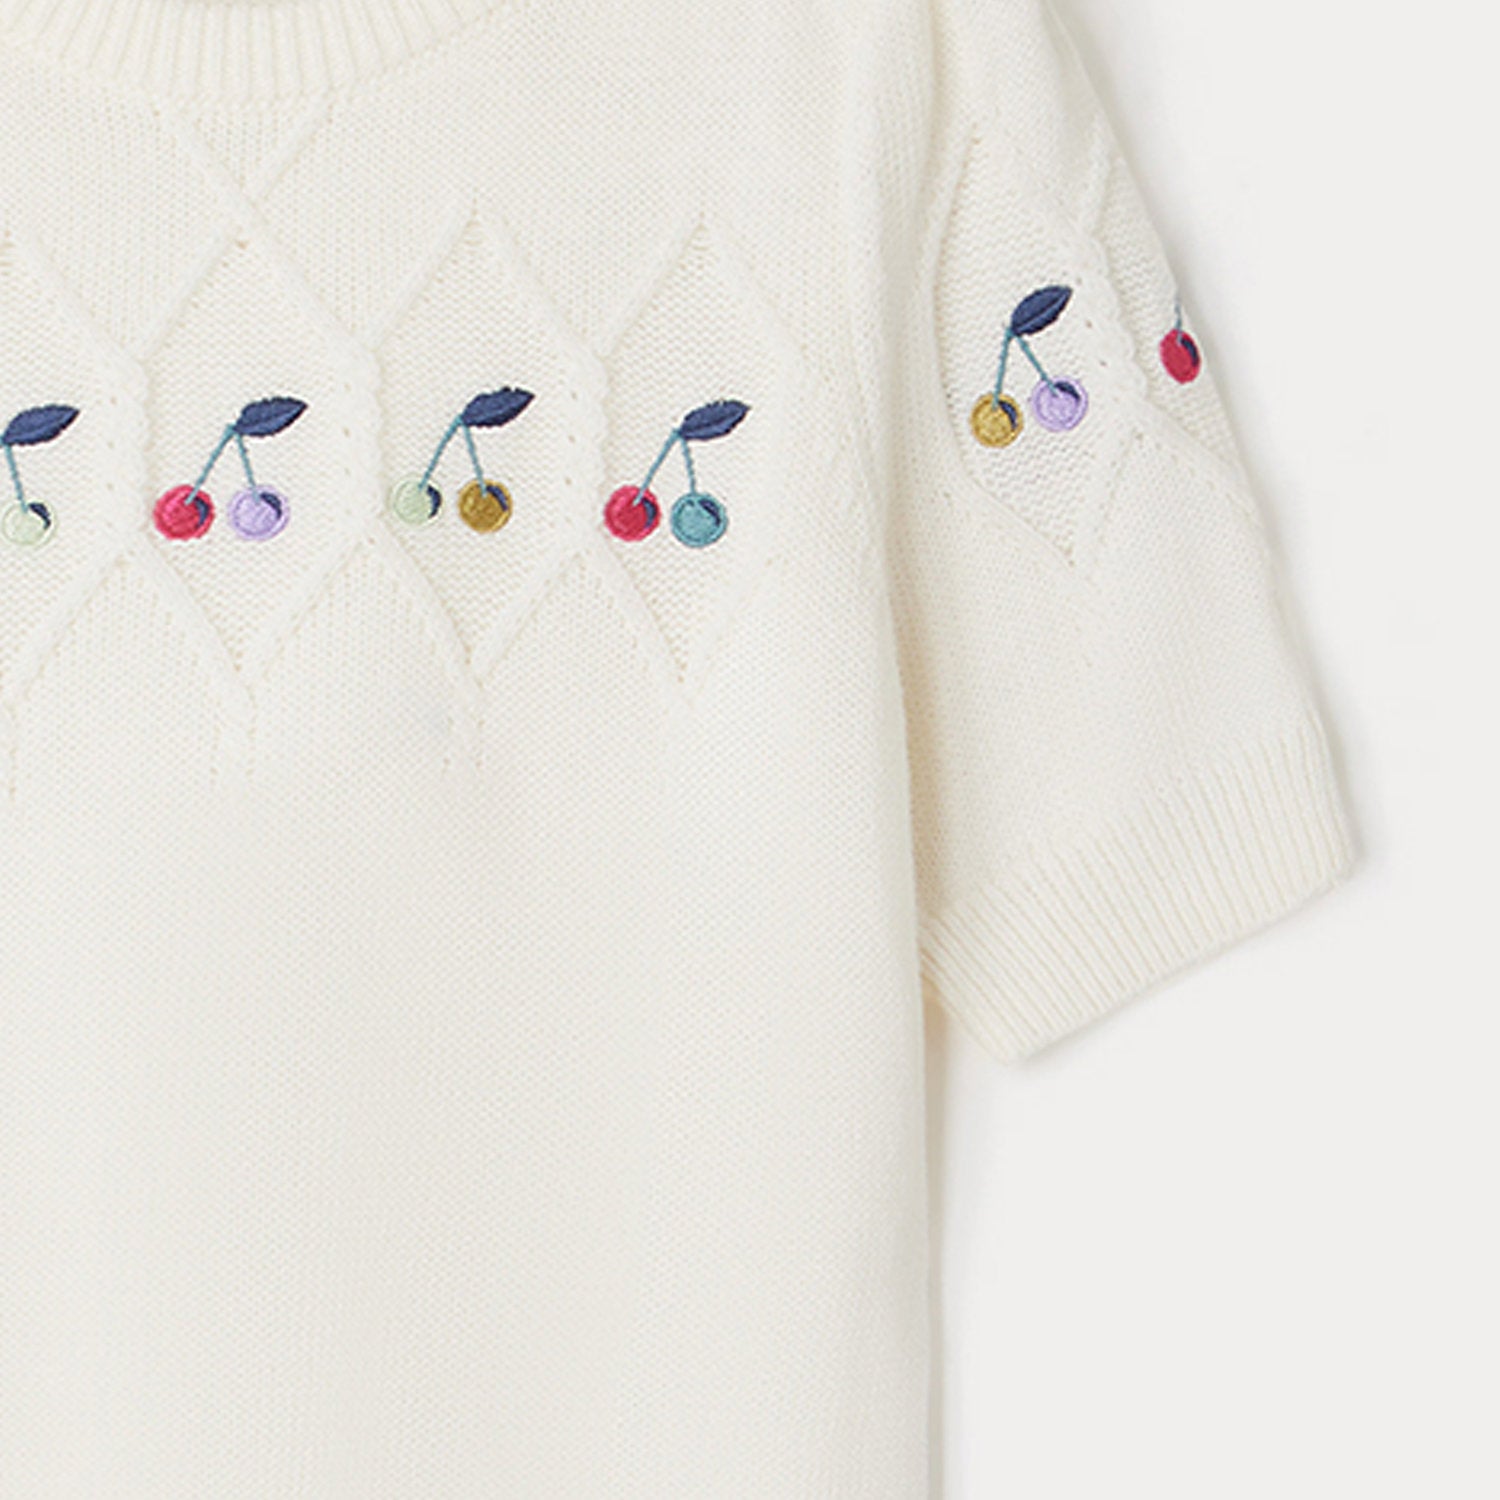 Girls White Embroidered Logo Cotton Sweater